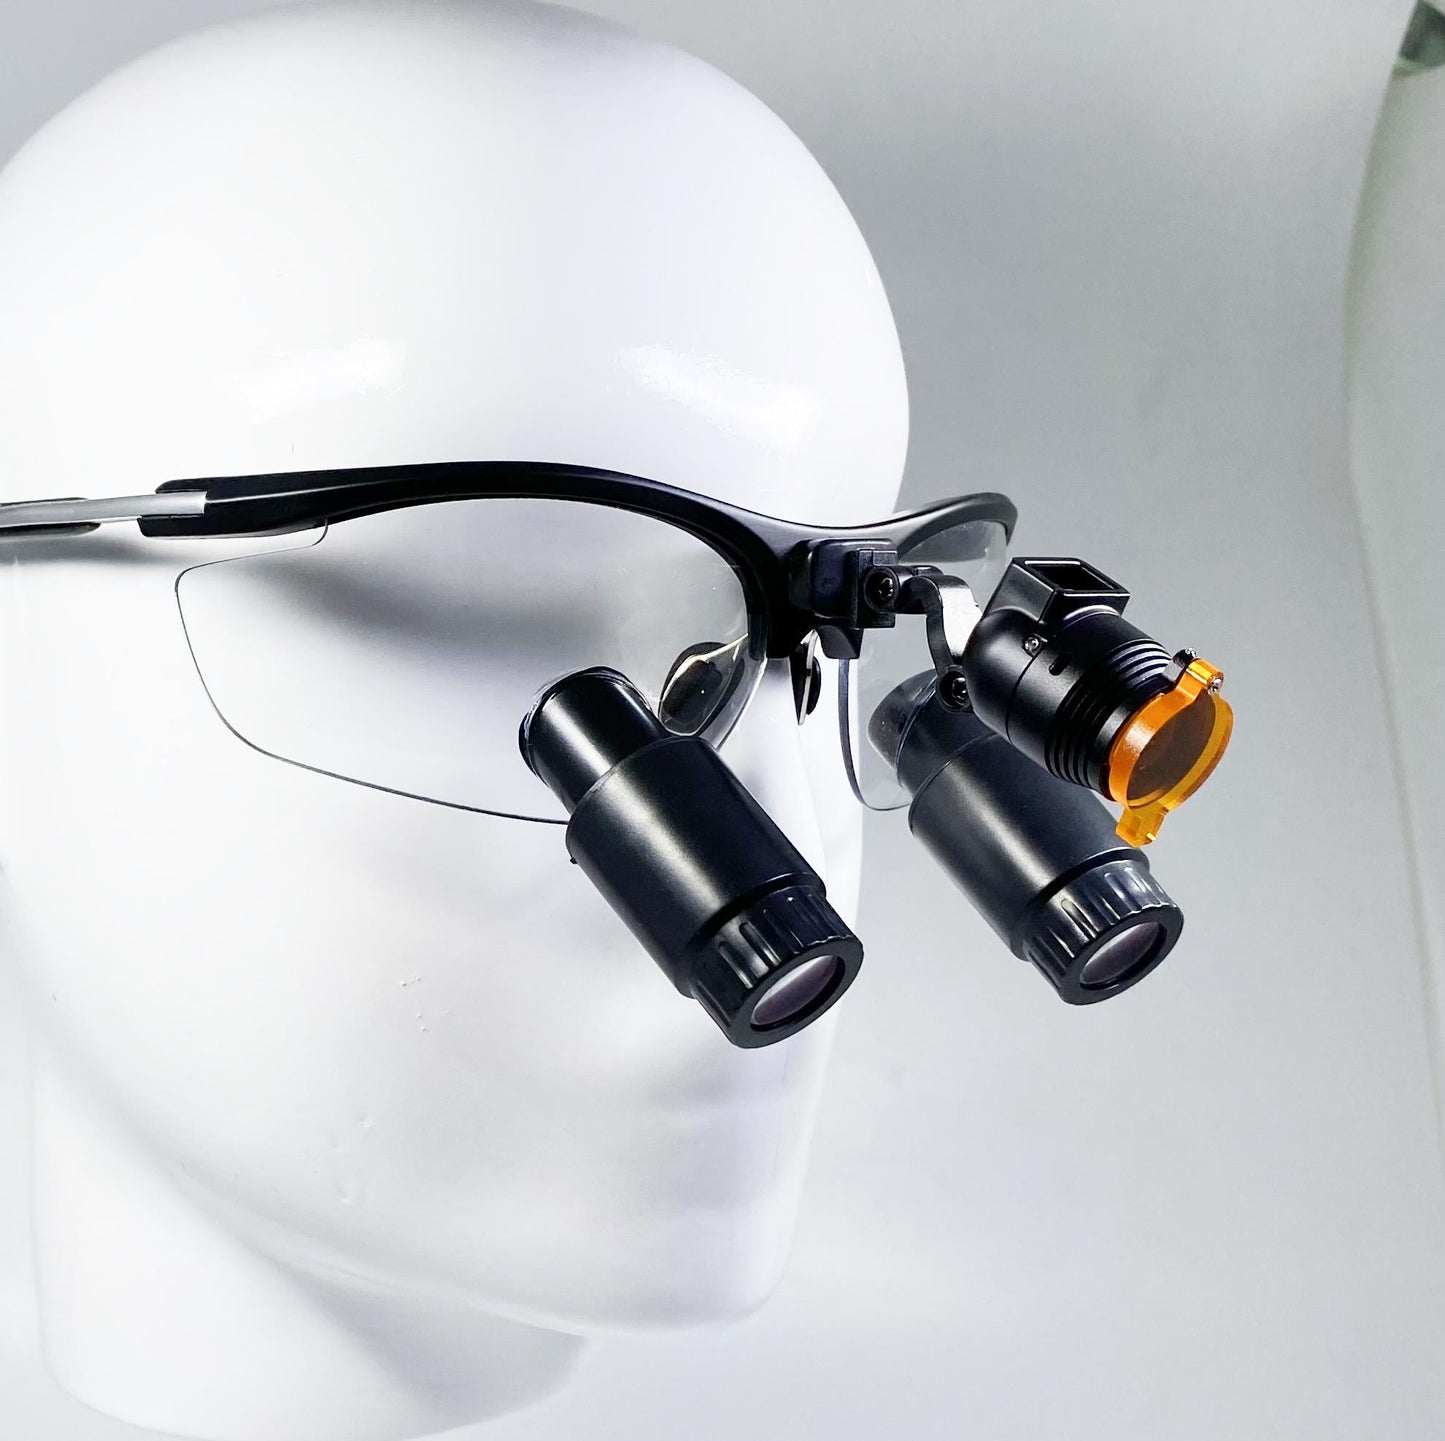 TTL2 Classic Customized Dental Loupe - with Light Source - Magnification 5.0x